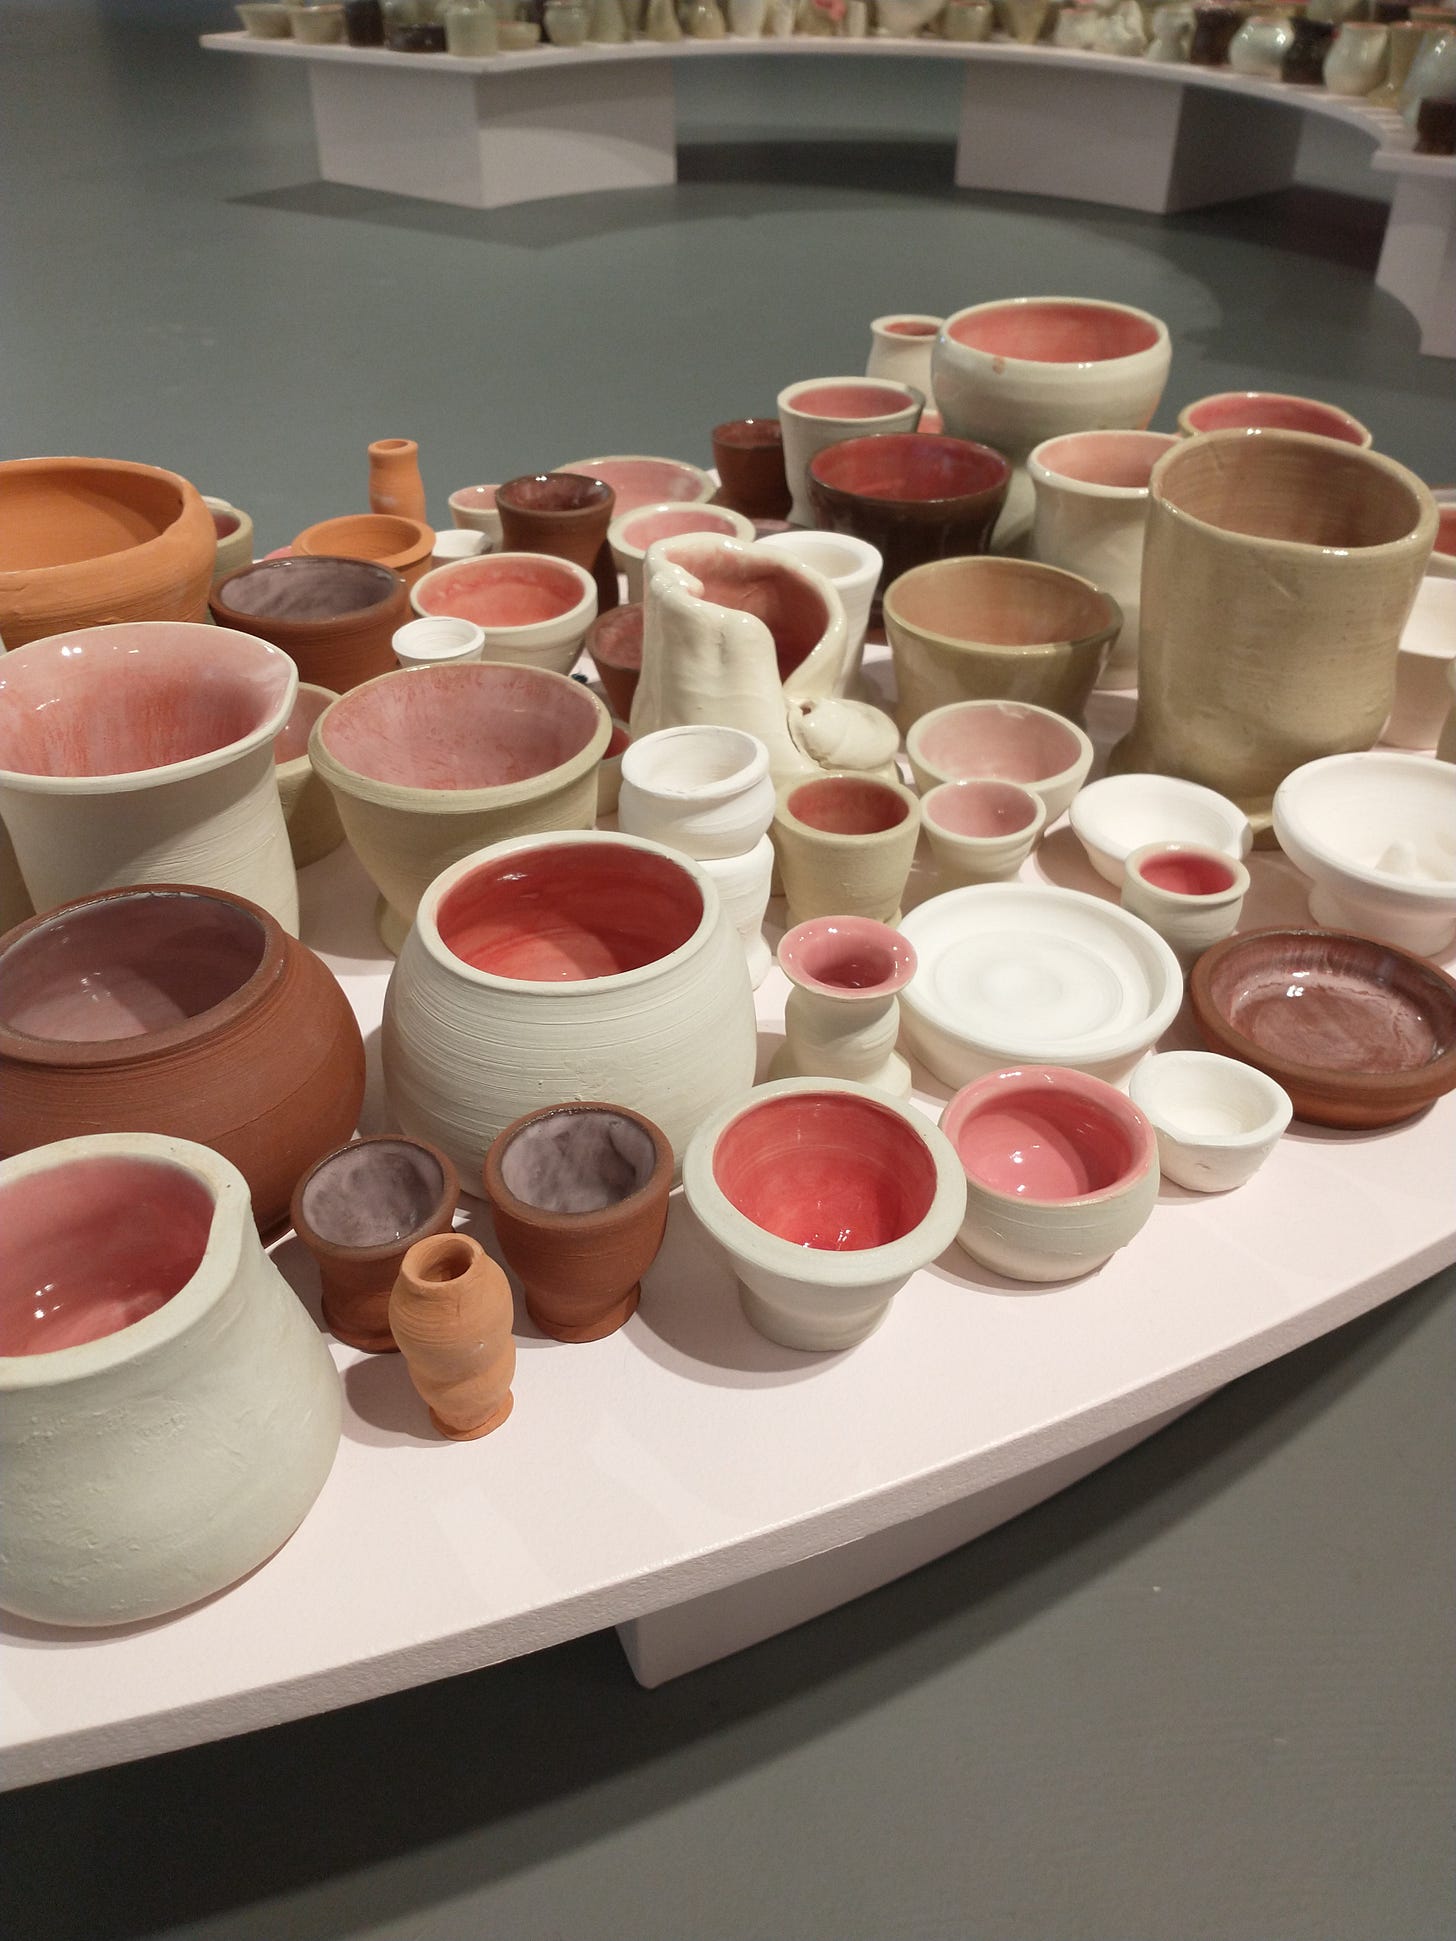 Close up of the ceramic vessels. They are all different shapes and sizes, but most have fleshy pink glaze inside with various flesh tone outsides.